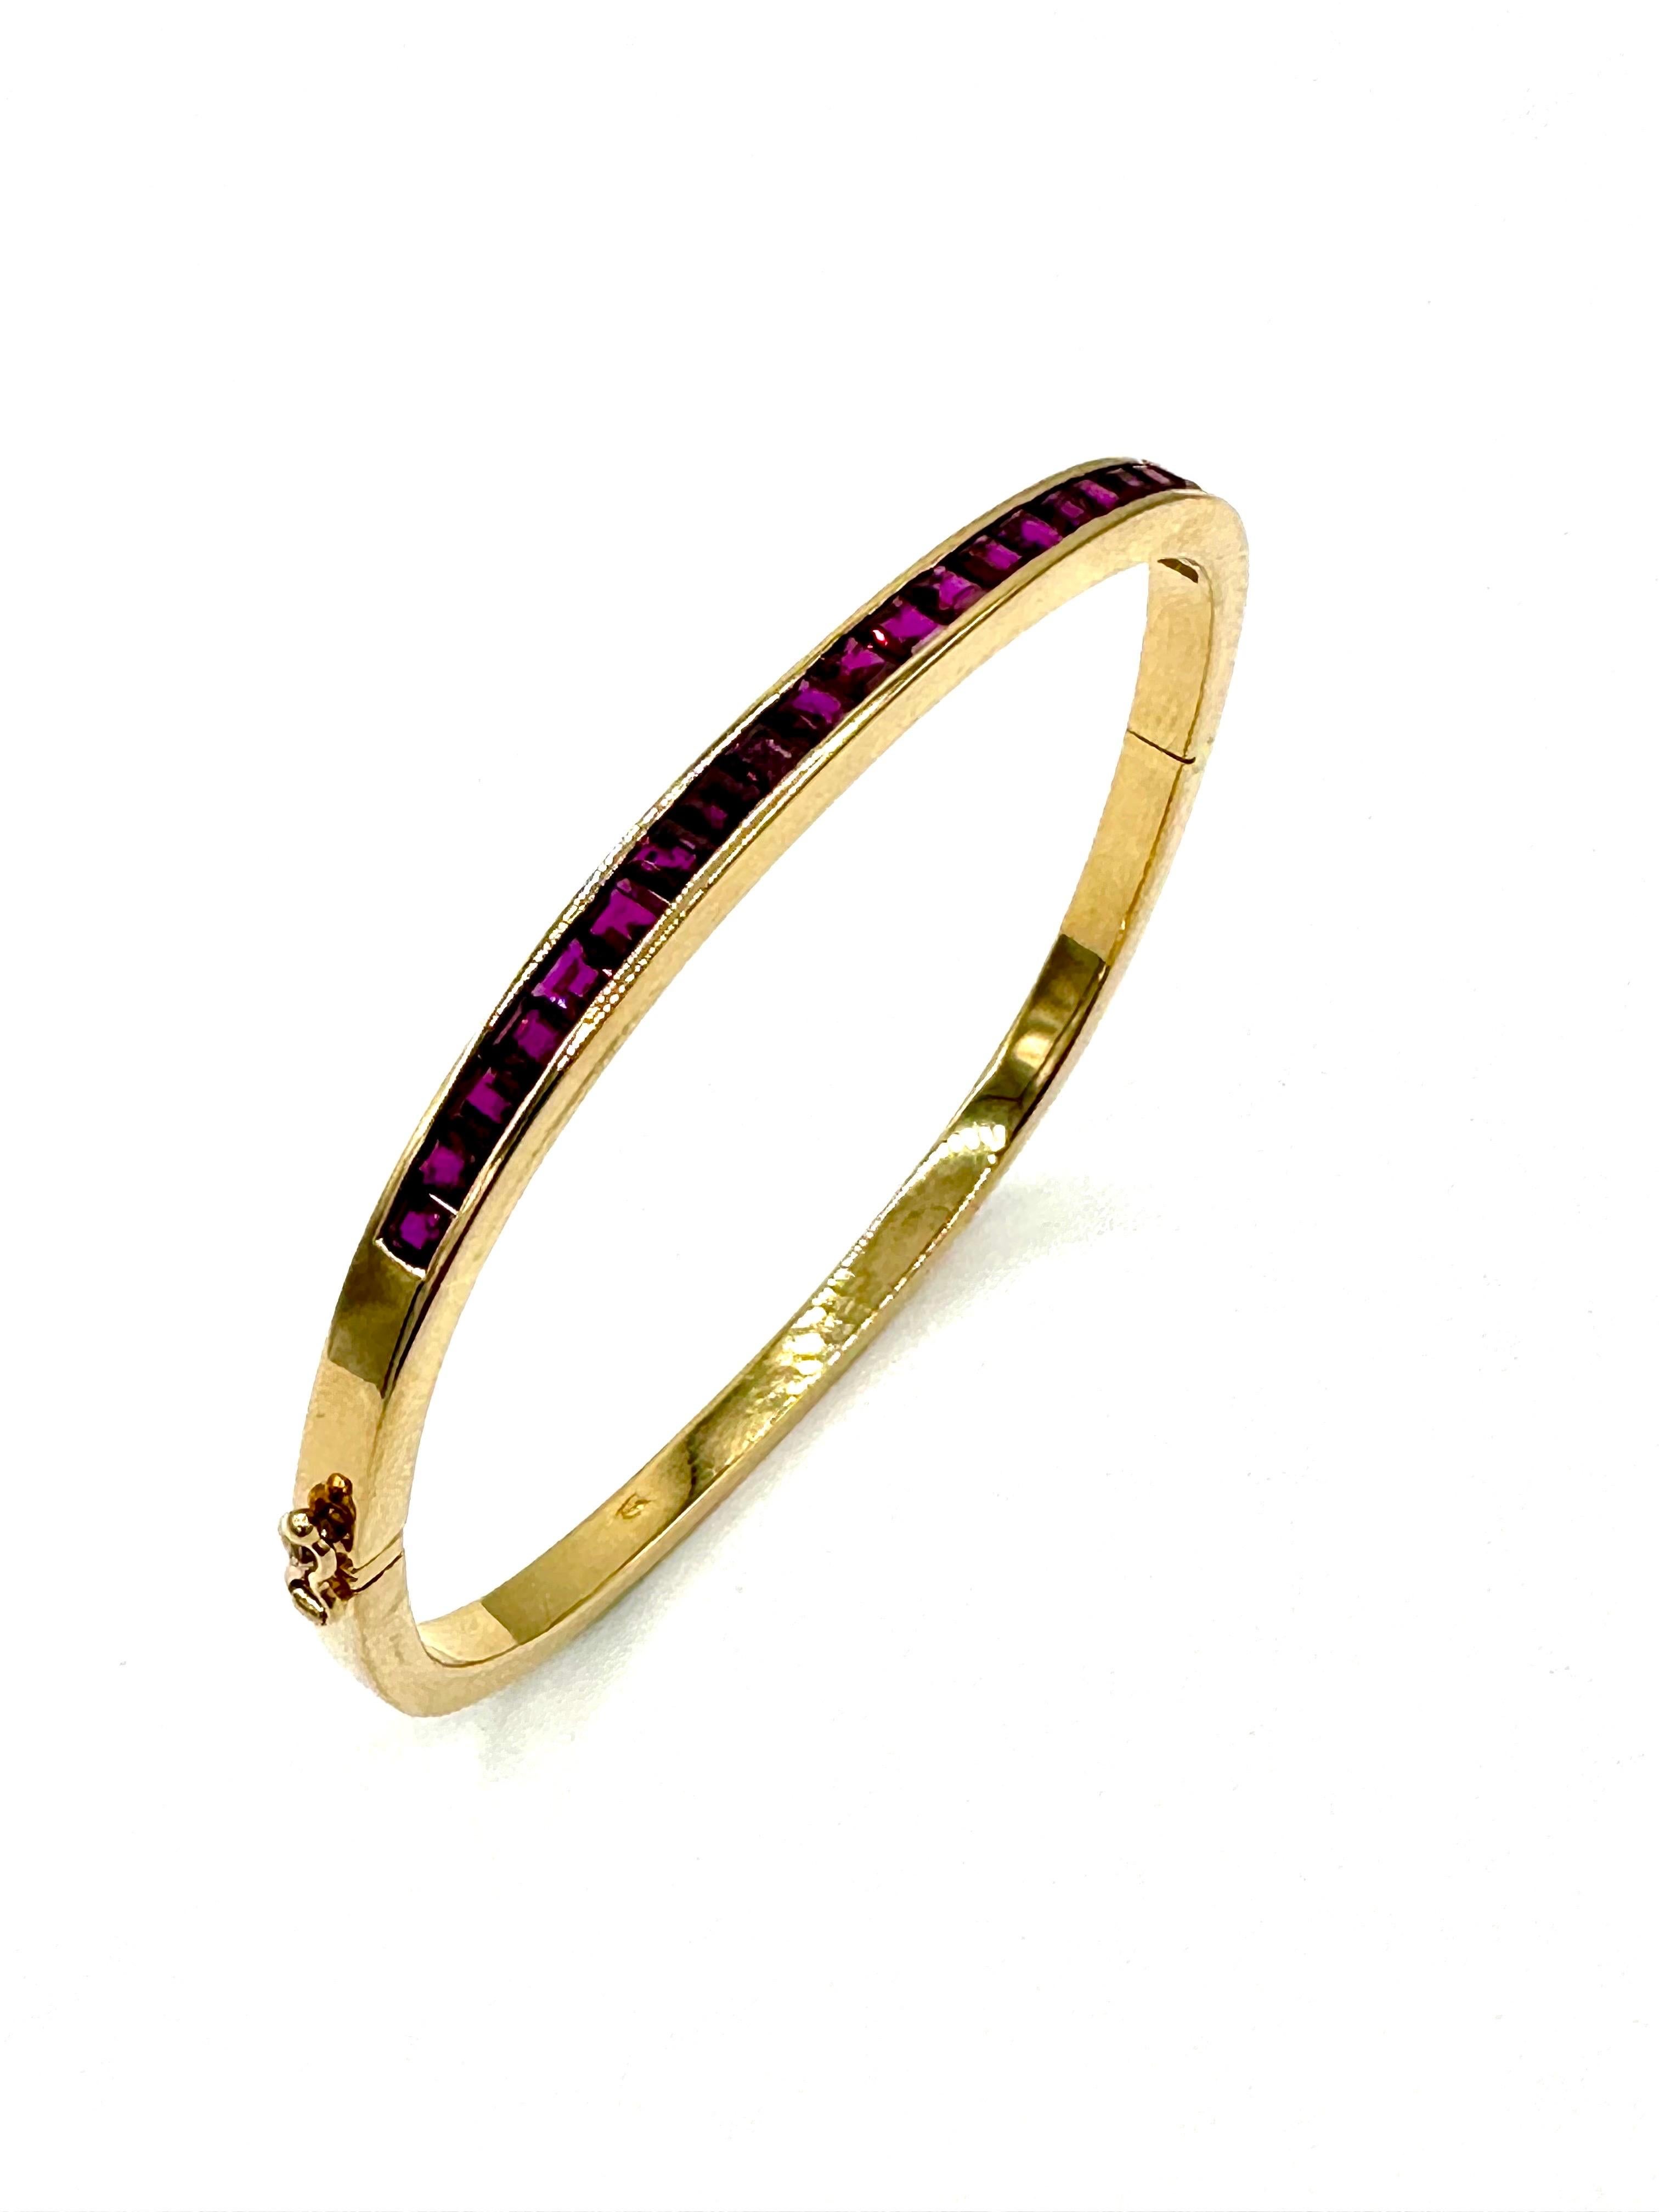 This is a very uniquely designed bracelet, set with 24 square cut Rubies, channel set in the top portion of the bangle bracelet.  The bracelet itself it fashioned in a cushion shape fit around the wrist, and has a hinged opening with a hidden clasp